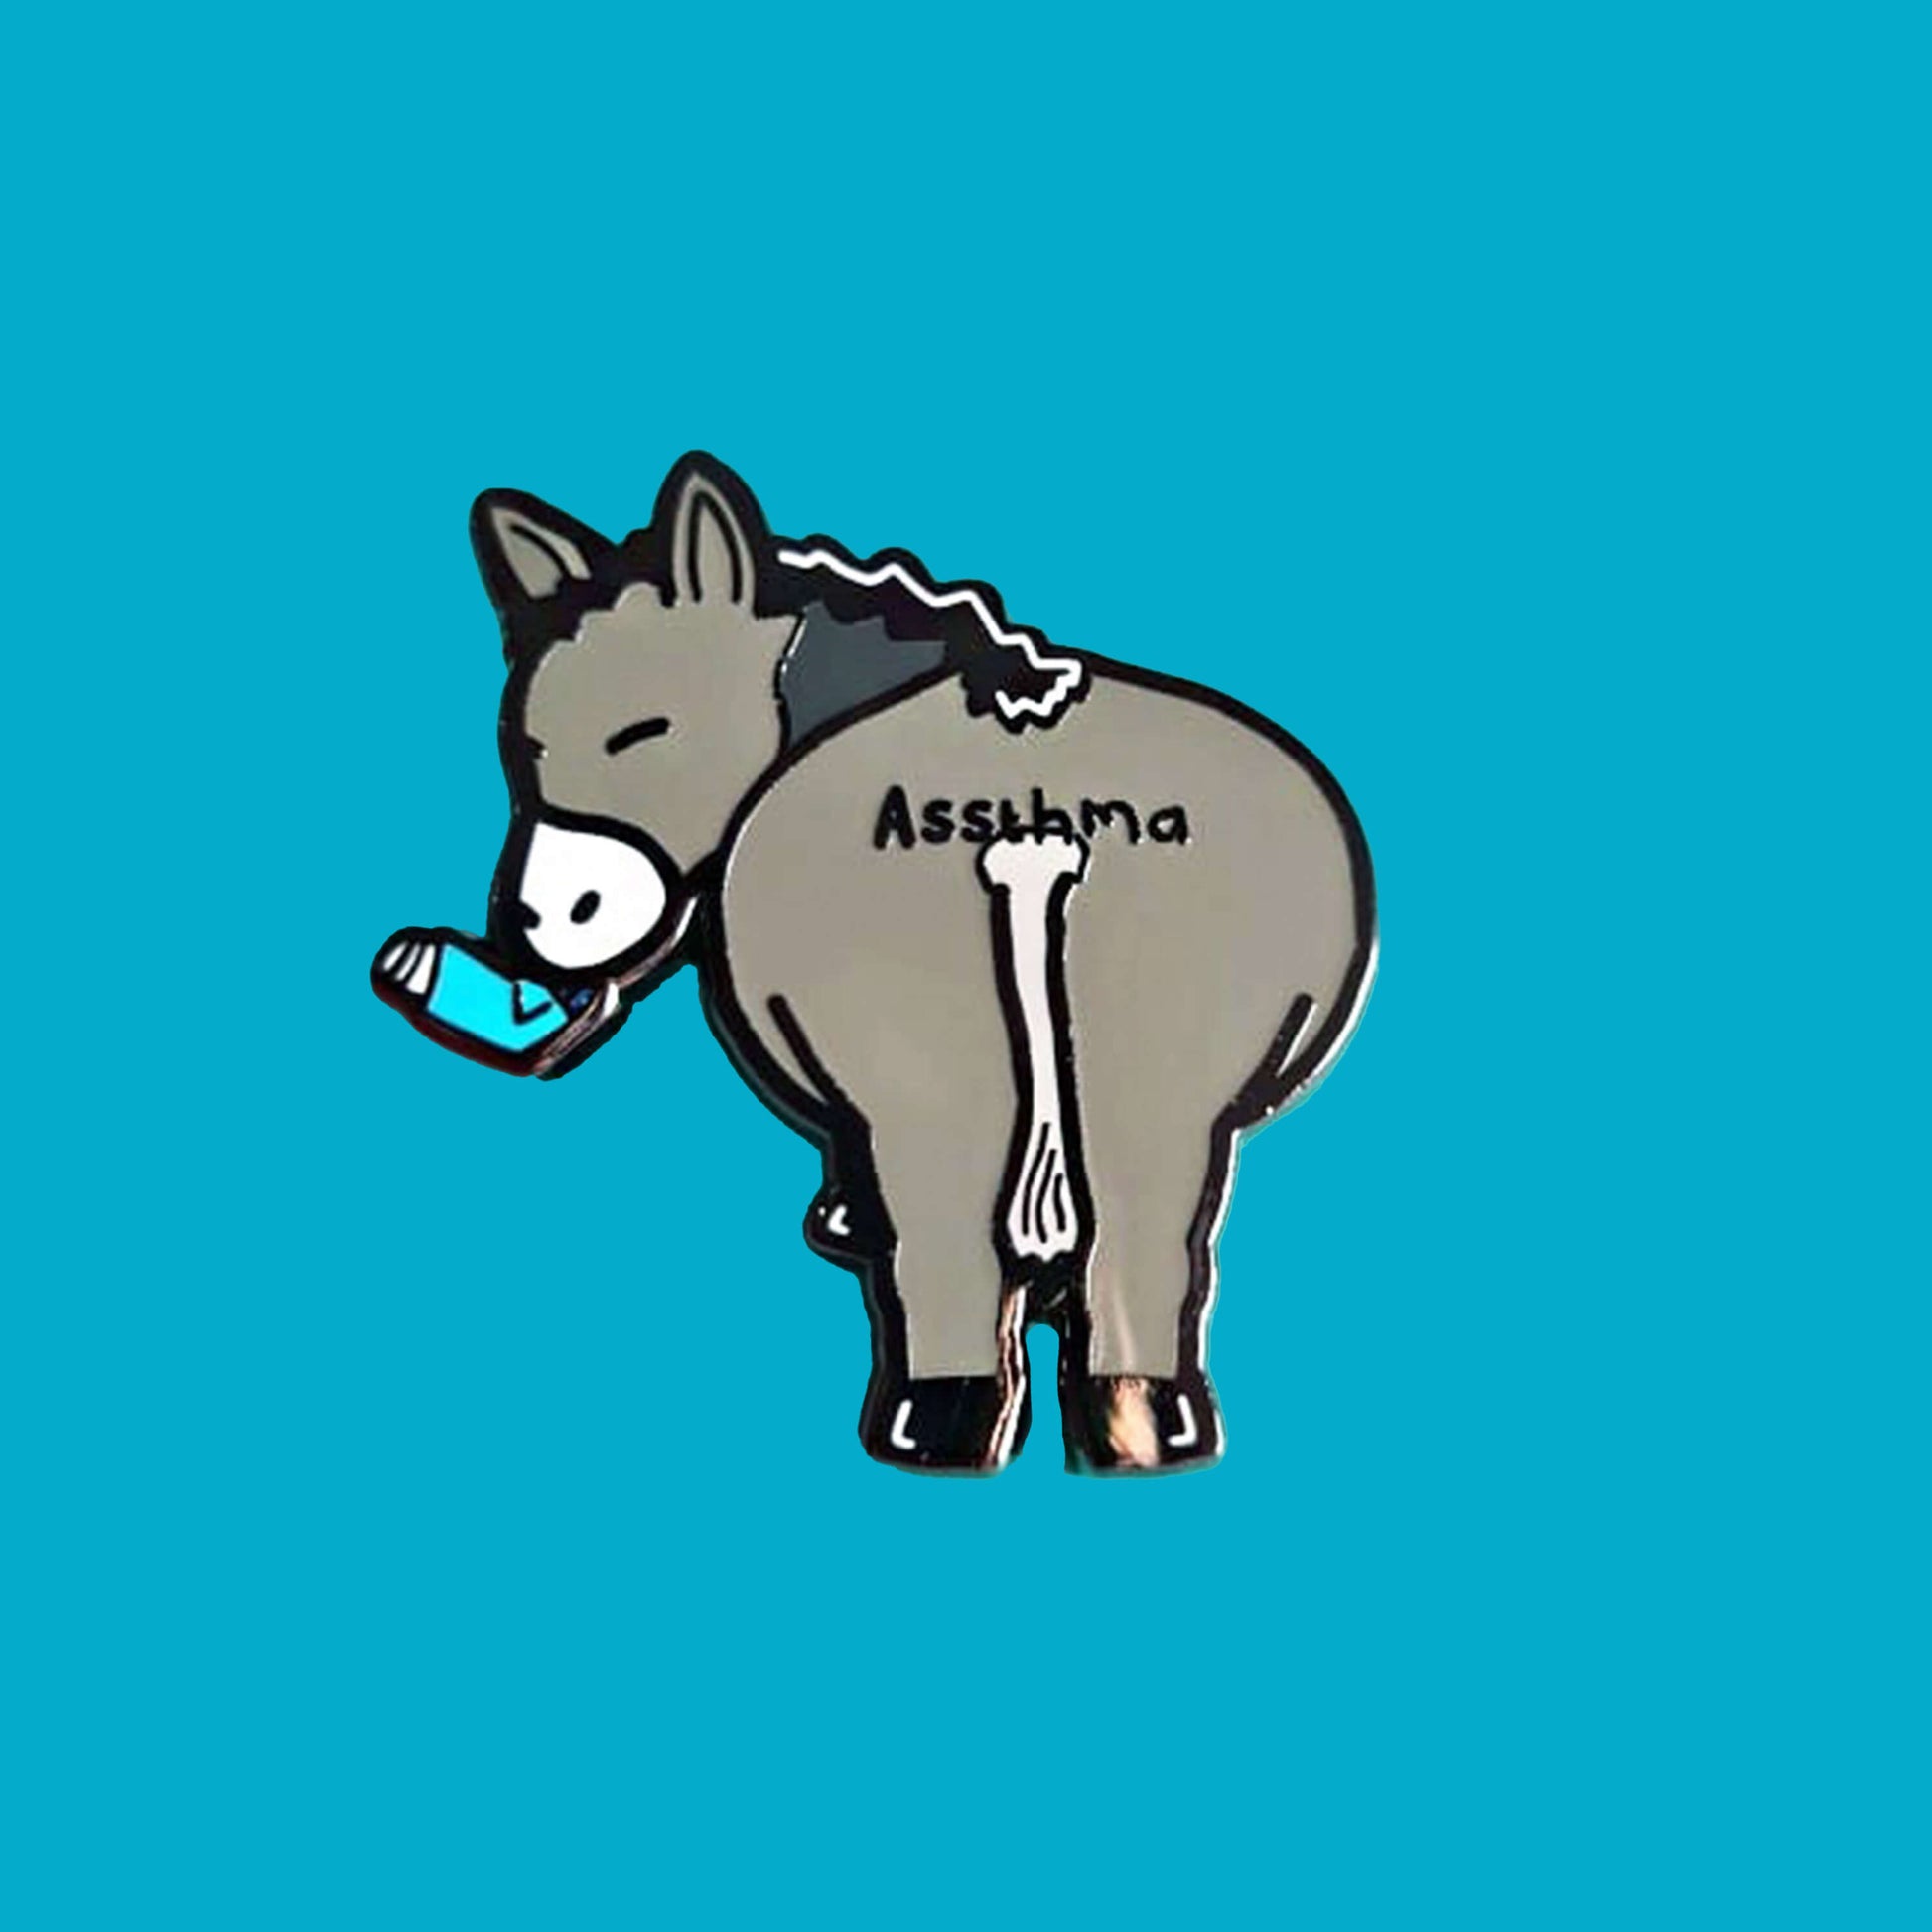 Assthma Enamel Pin - Asthma on a blue background. A grey donkey ass showing its behind with a blue asthma pump in its mouth and the word Assthma across its behind. The pin is designed to raise awareness for asthma.